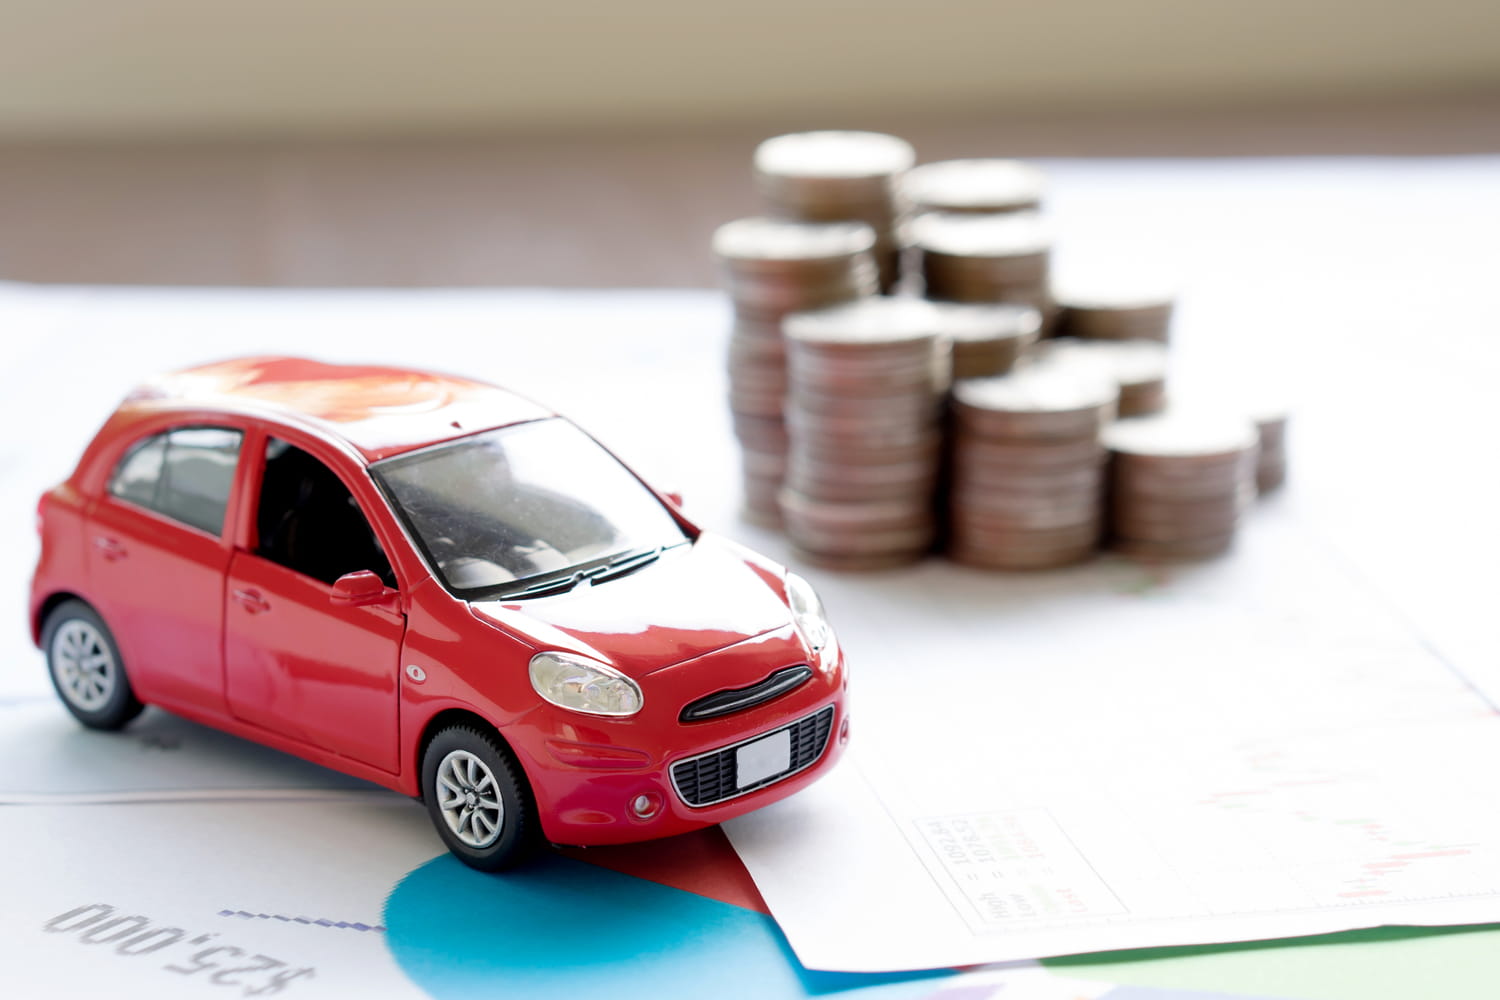 3 Easy Ways to Save on Auto Insurance